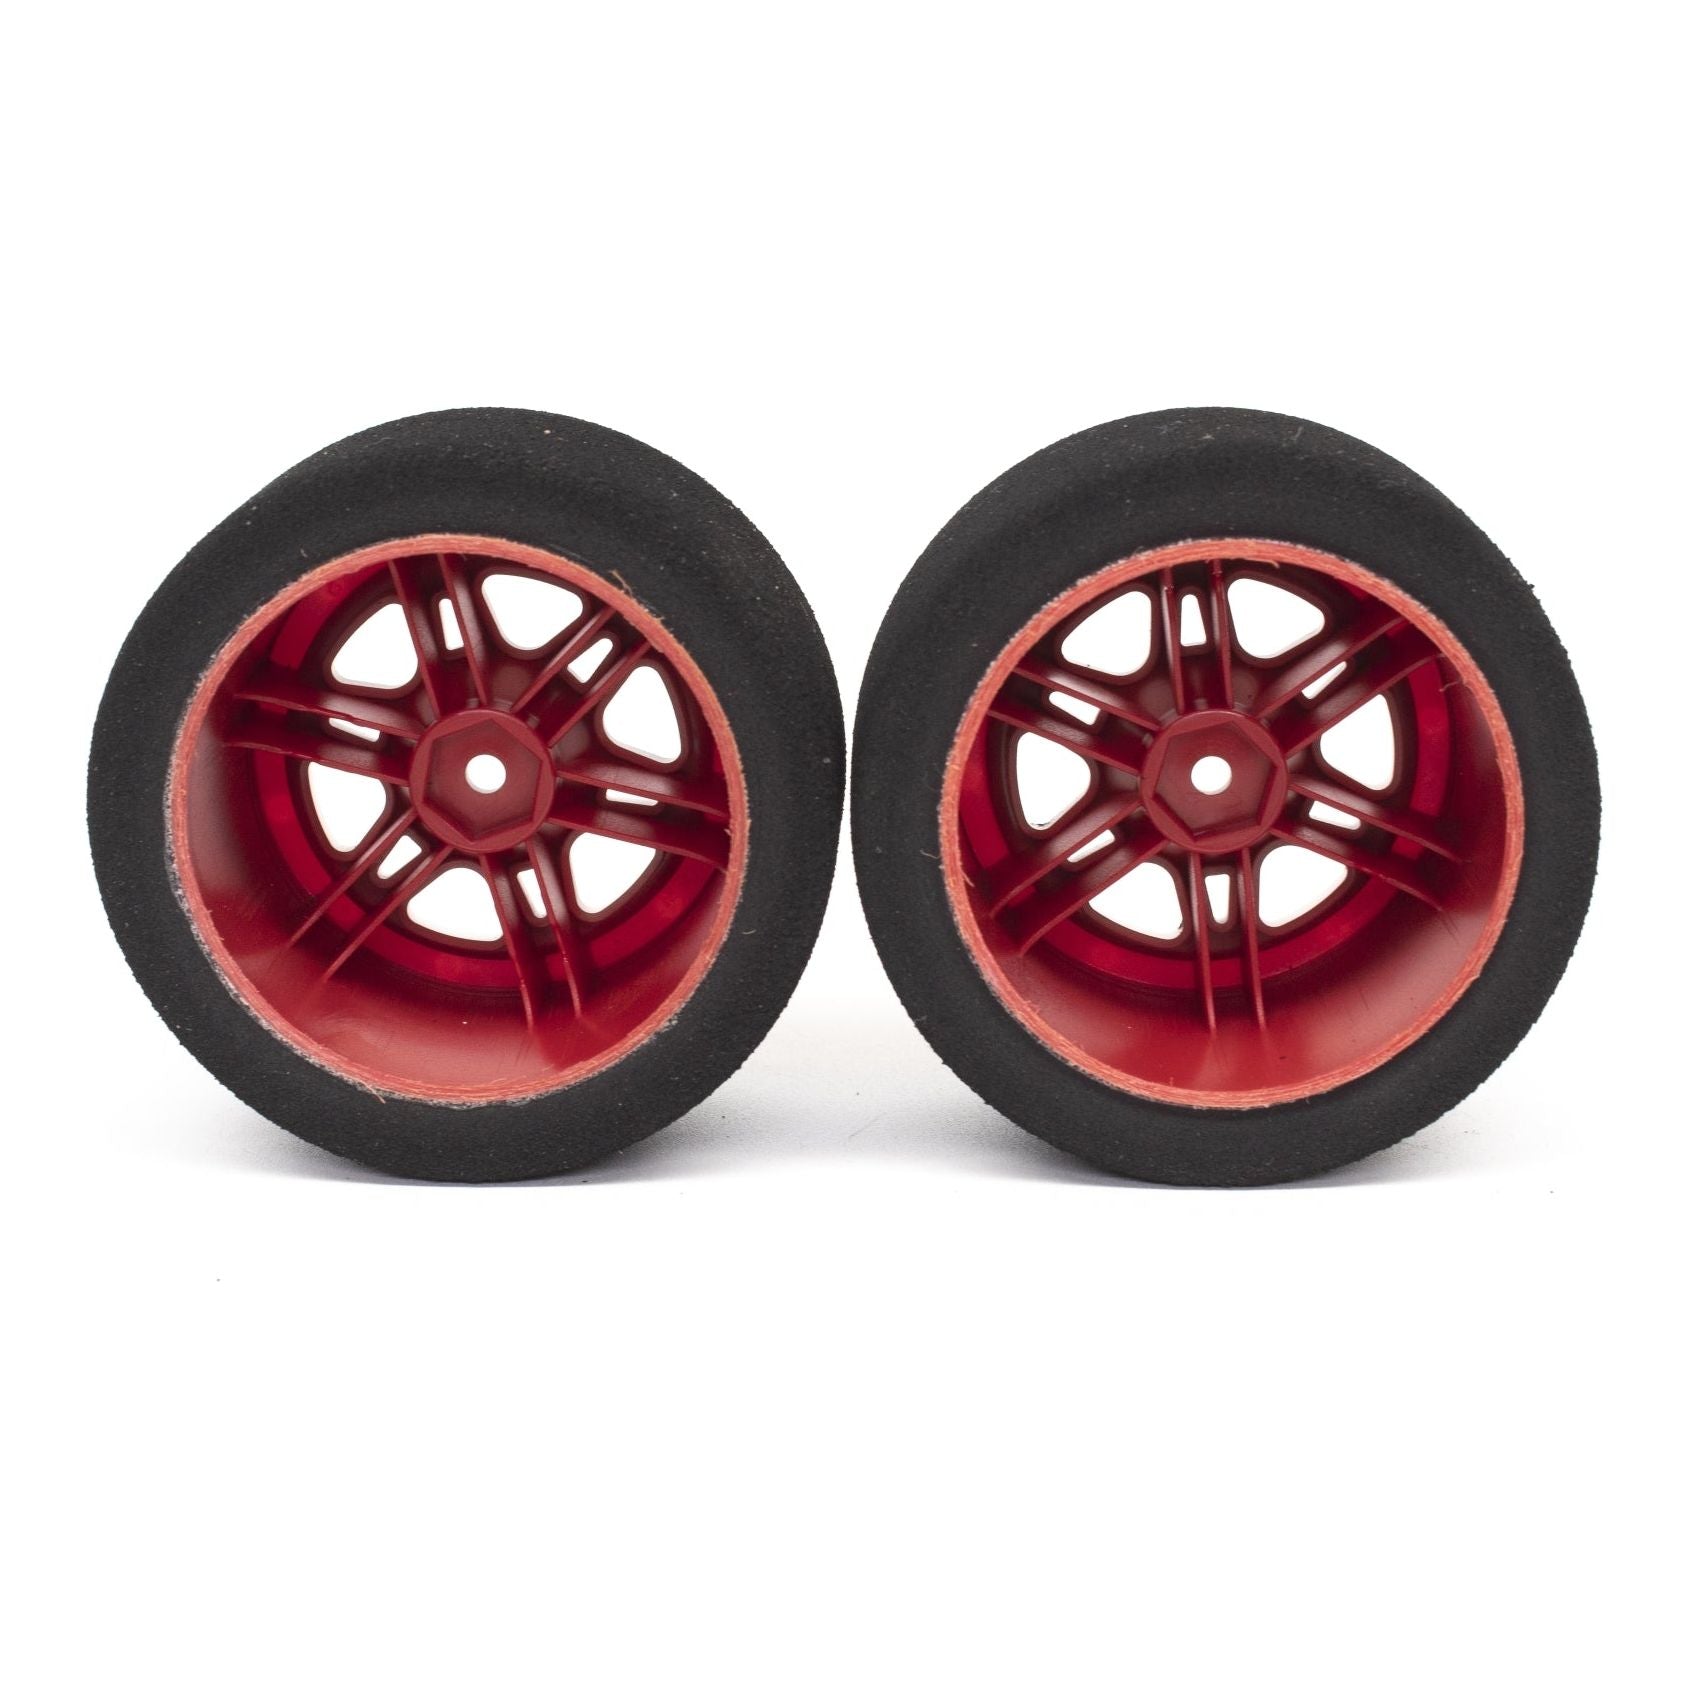 IMEX Mounted Foam Tires (12mm Hex)